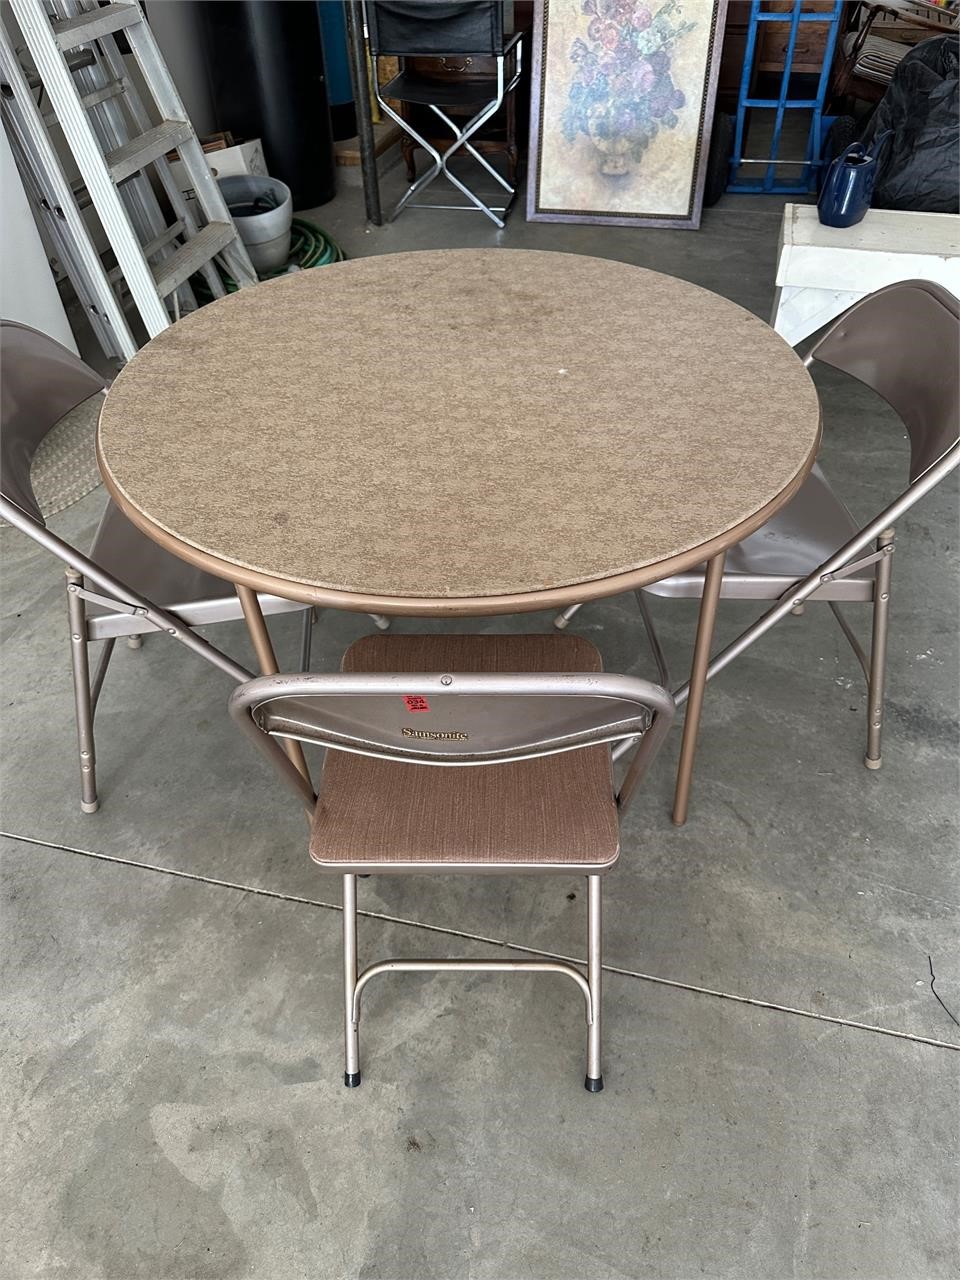 Round Folding Card Table with 3 Chairs